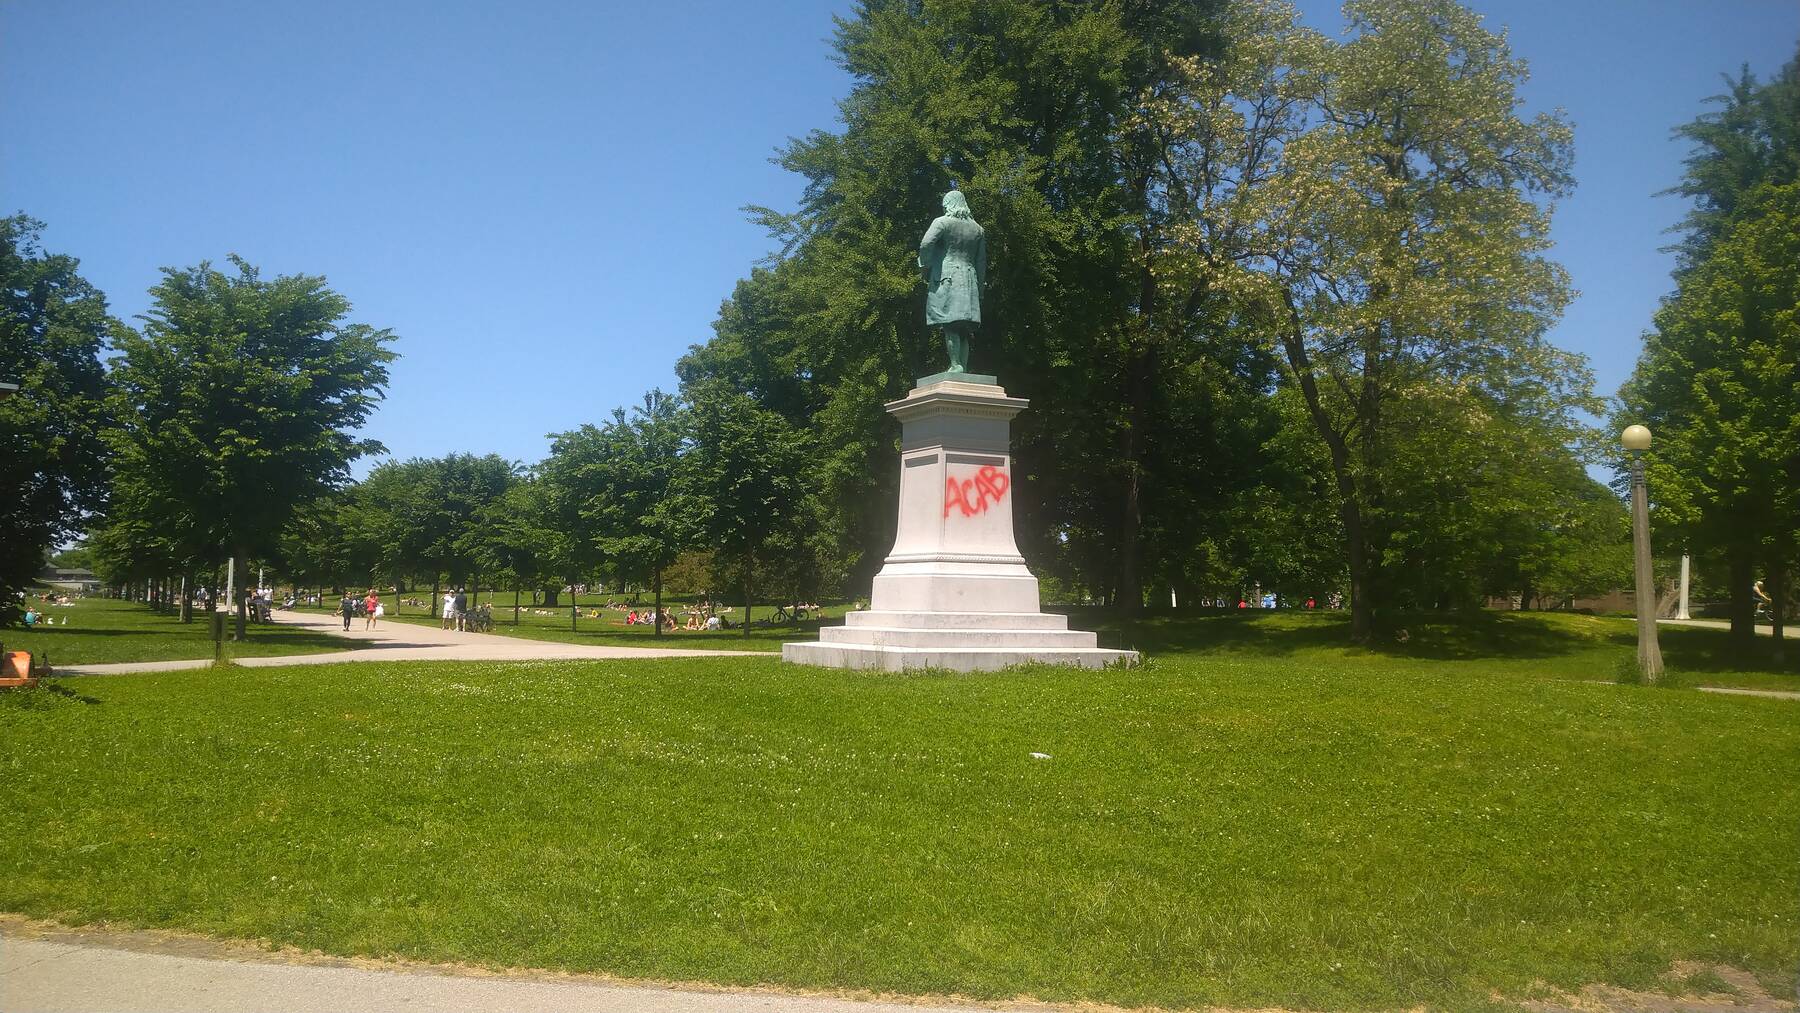 ACAB Spray Painted on a Statue in Lincoln Park Chicago